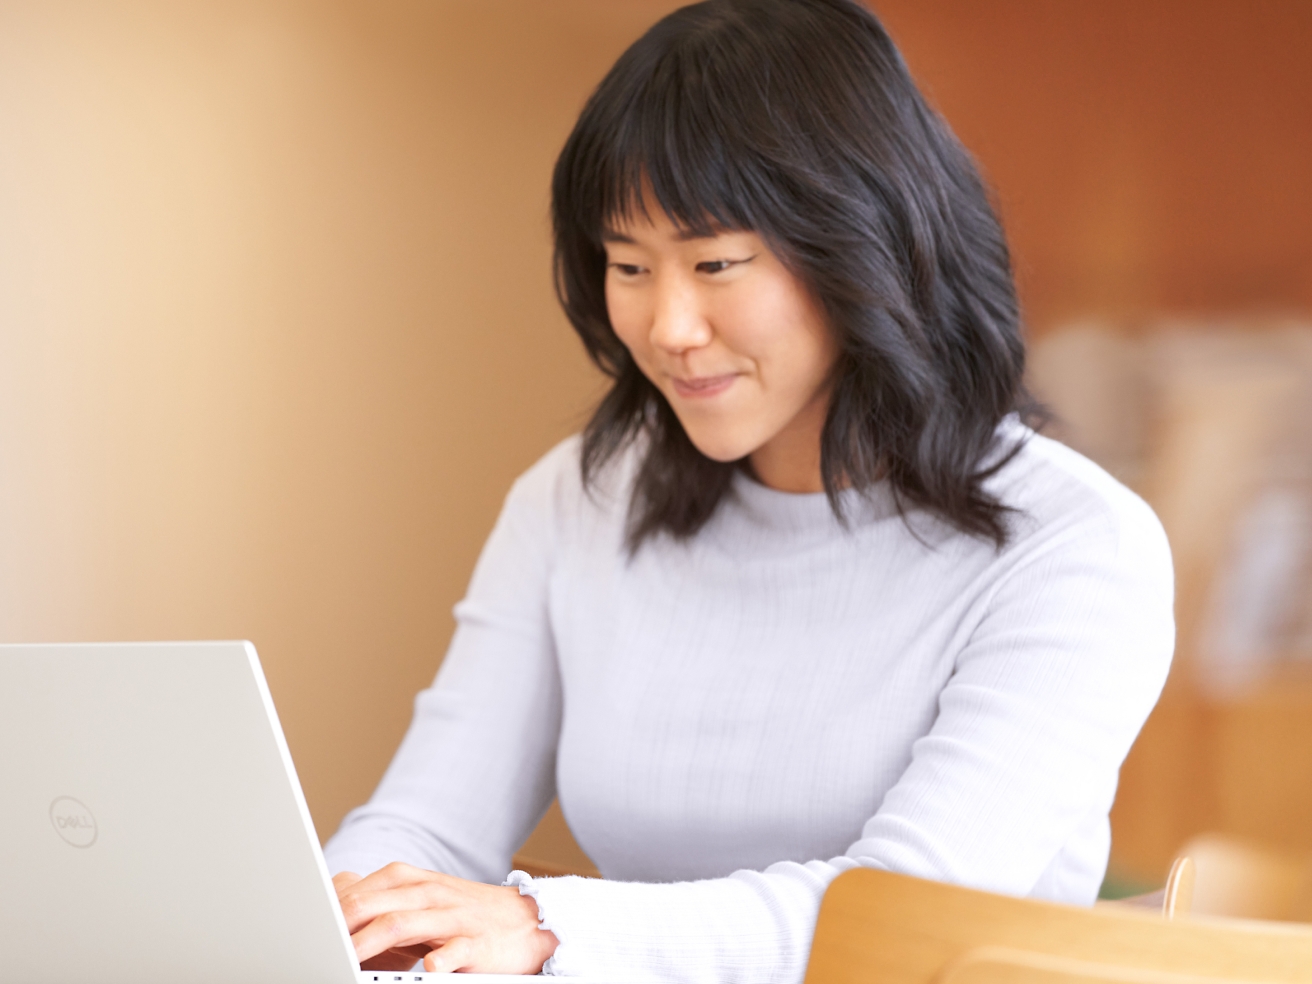 A young woman with black hair, wearing a light turtleneck sweater, is focused on working on her laptop